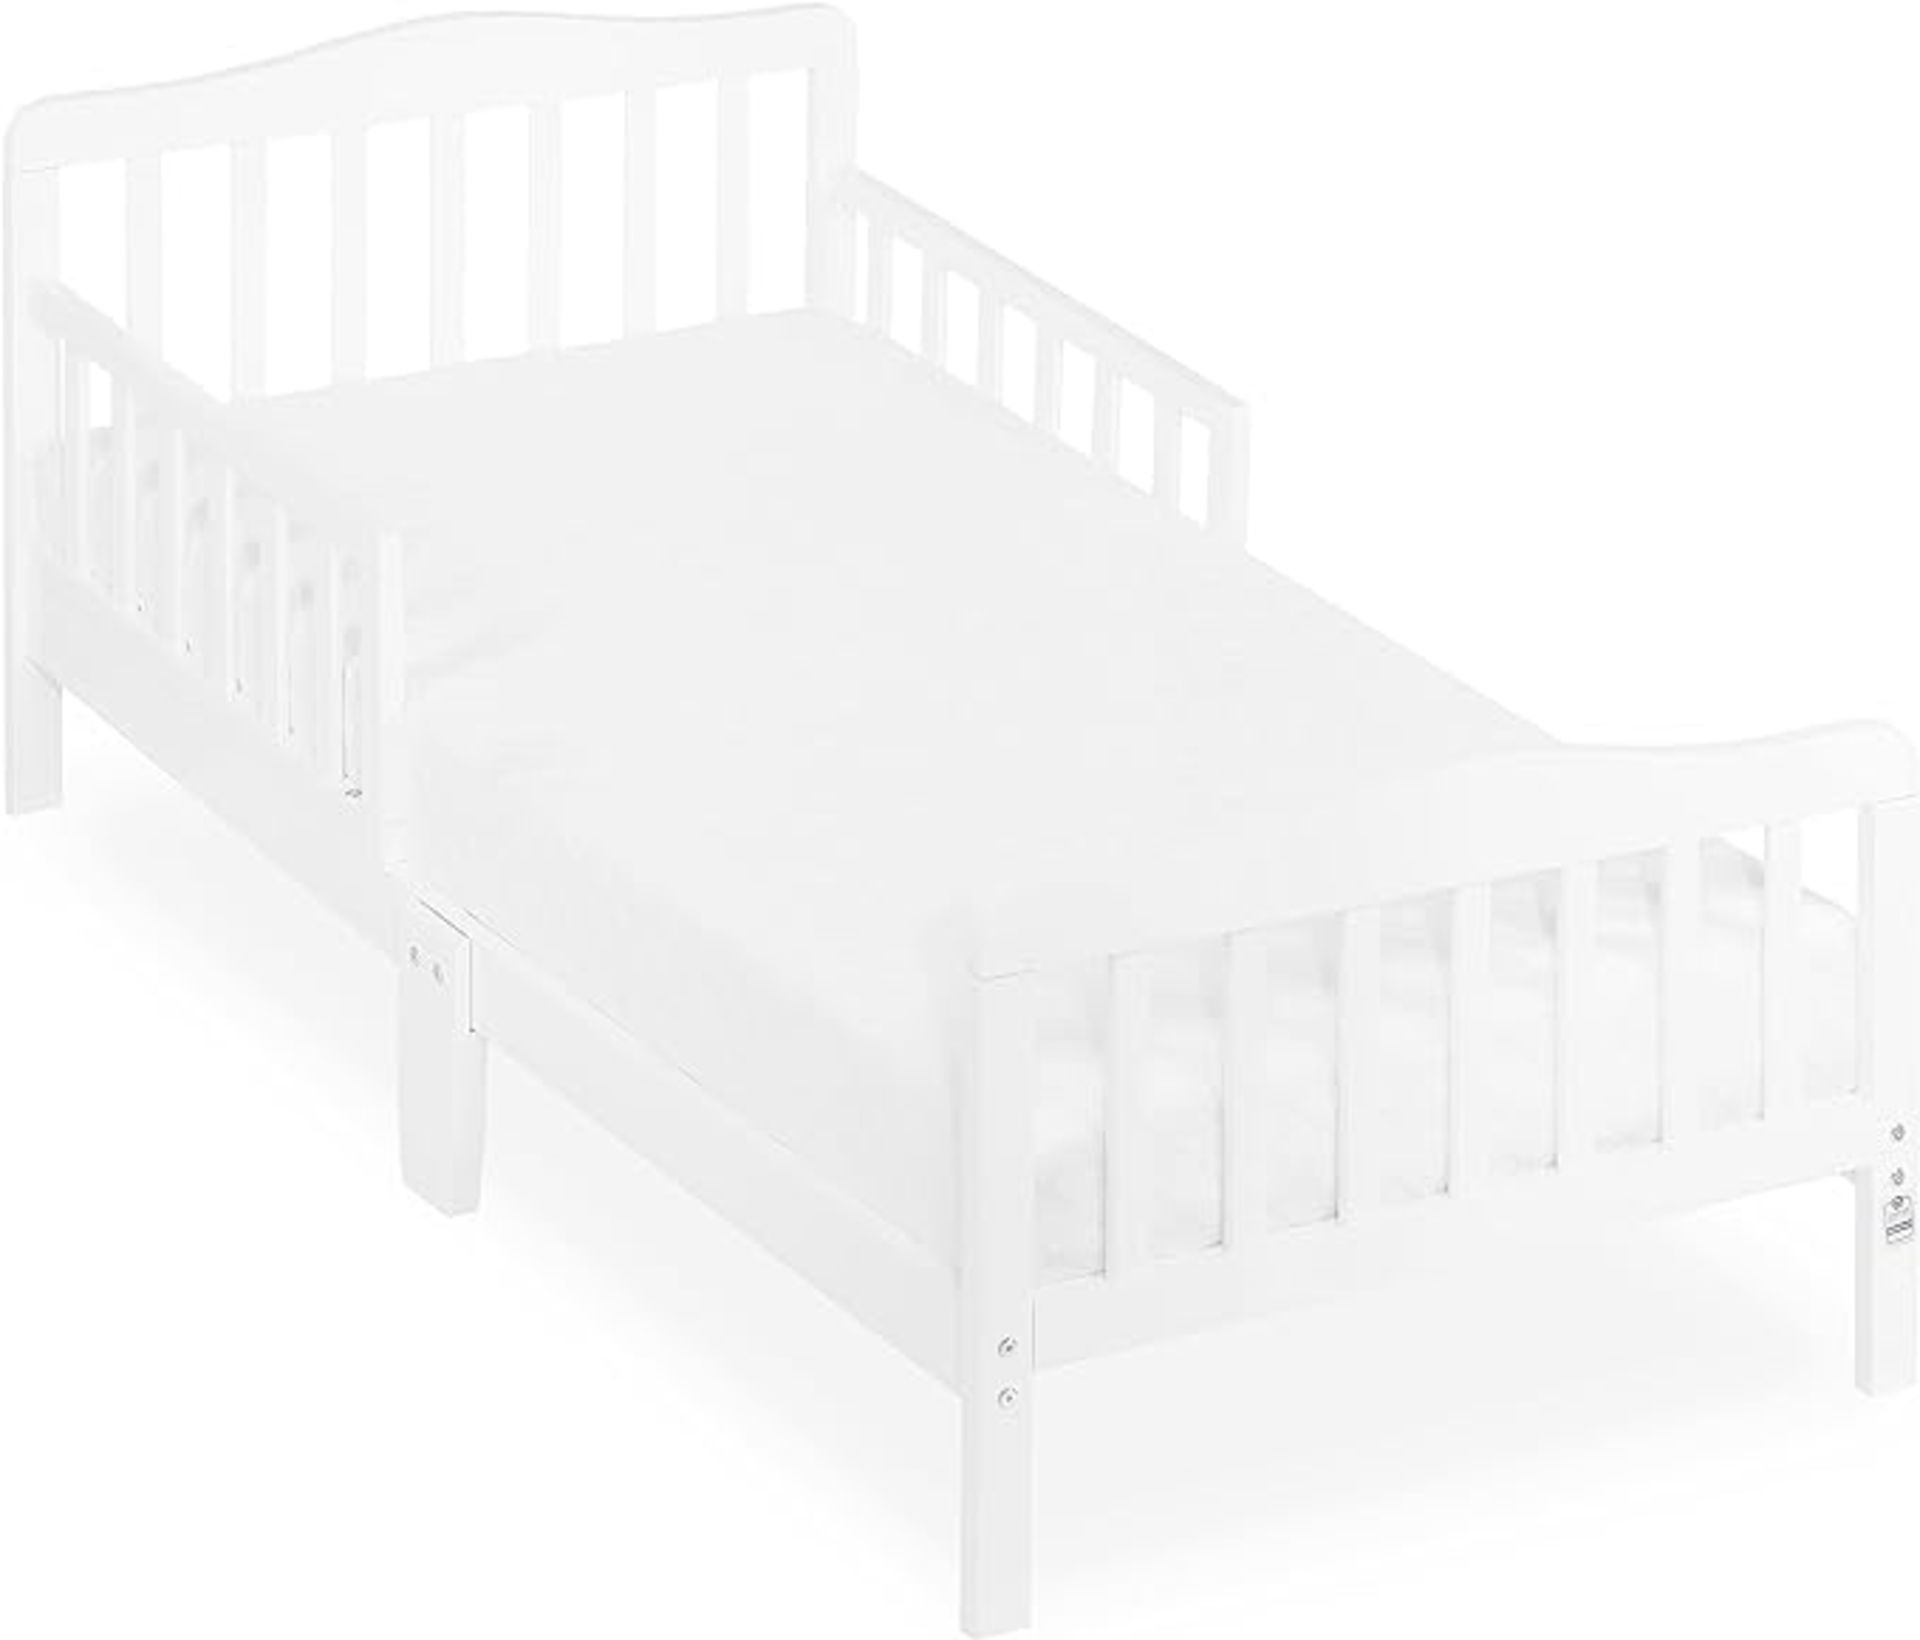 Brand New Dream on Me Classic Toddler Bed. Product dimensionS - 144.8L x 71.1W x 76.2H CM Comes with - Image 4 of 4